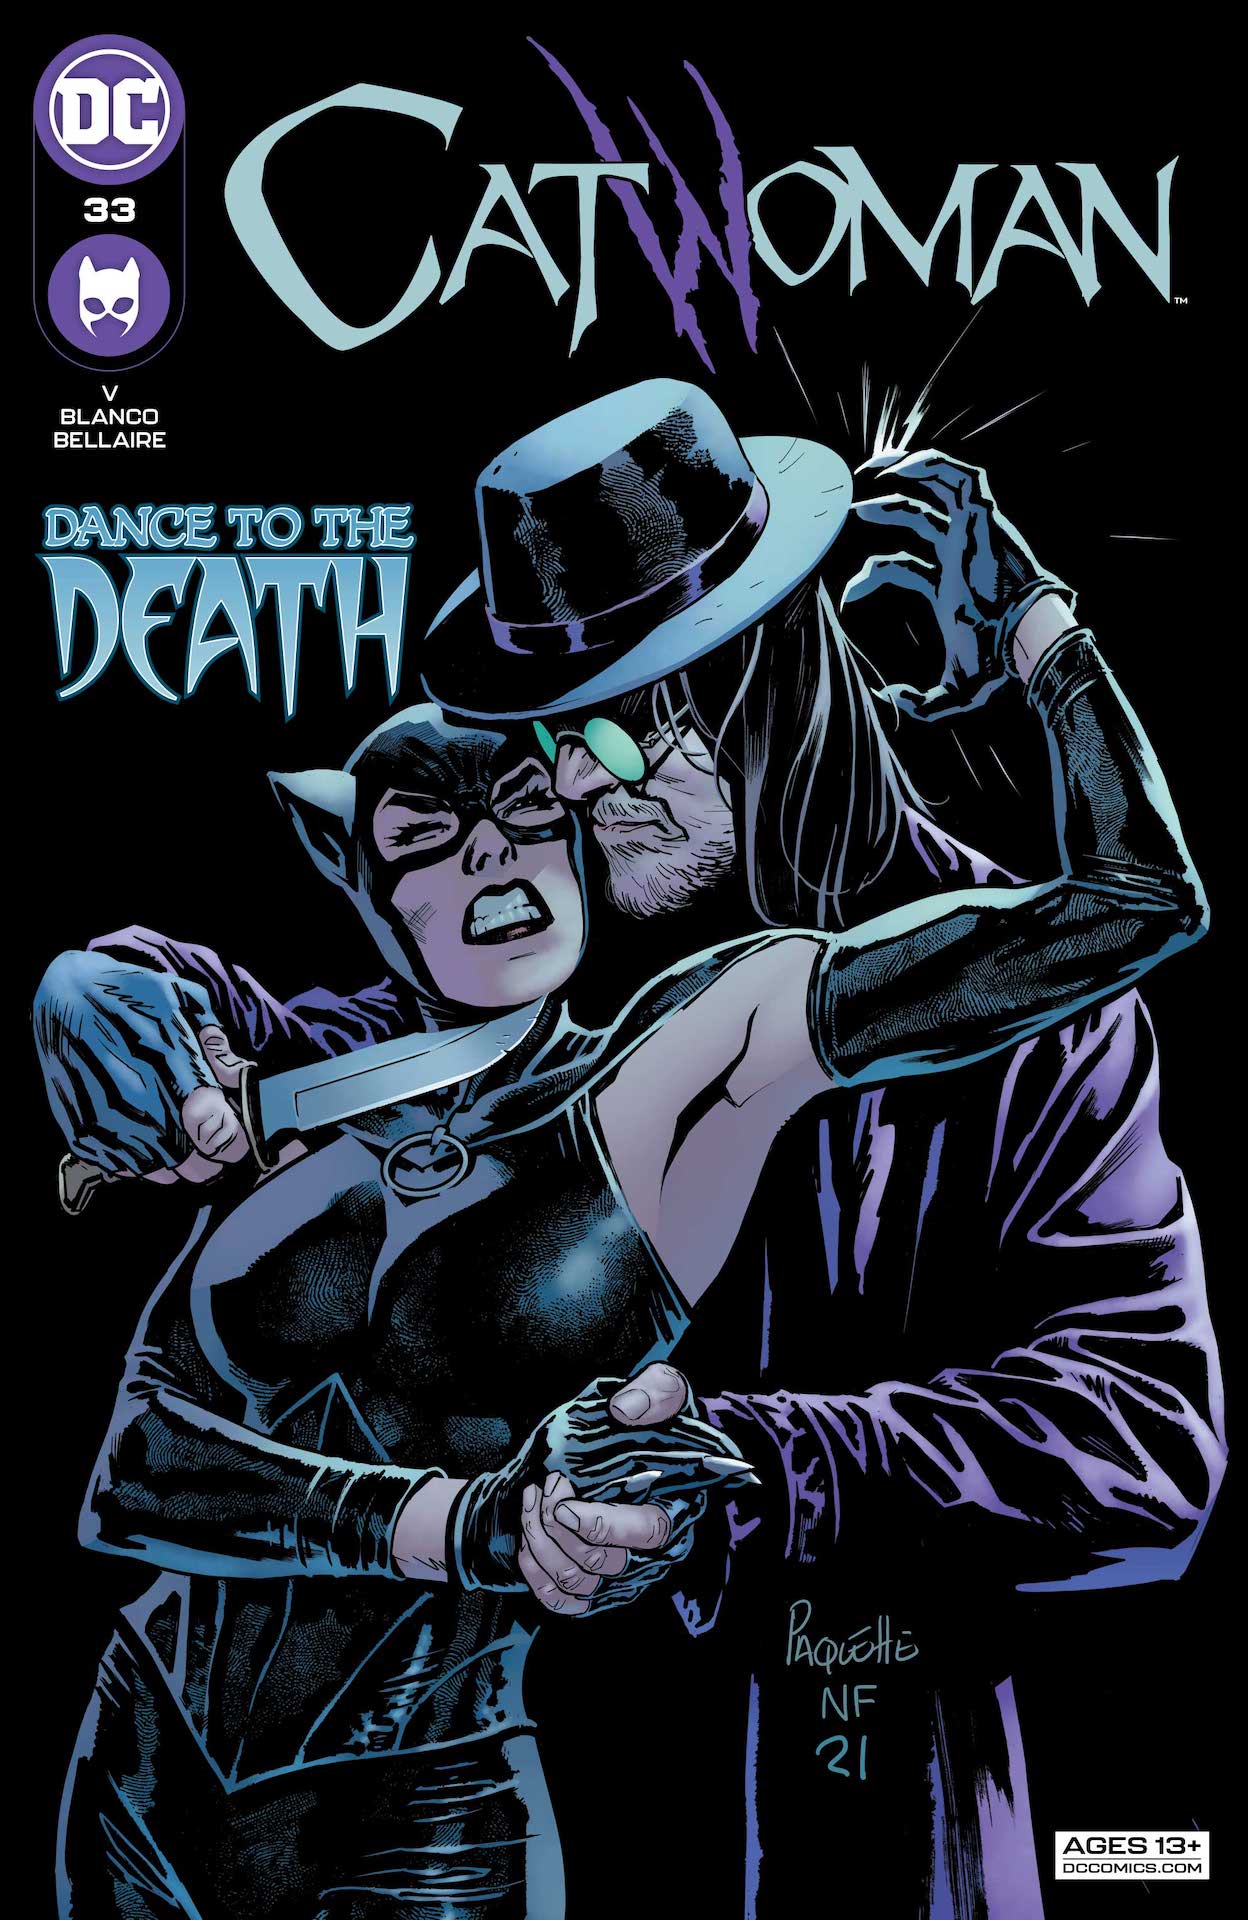 DC Preview: Catwoman #33